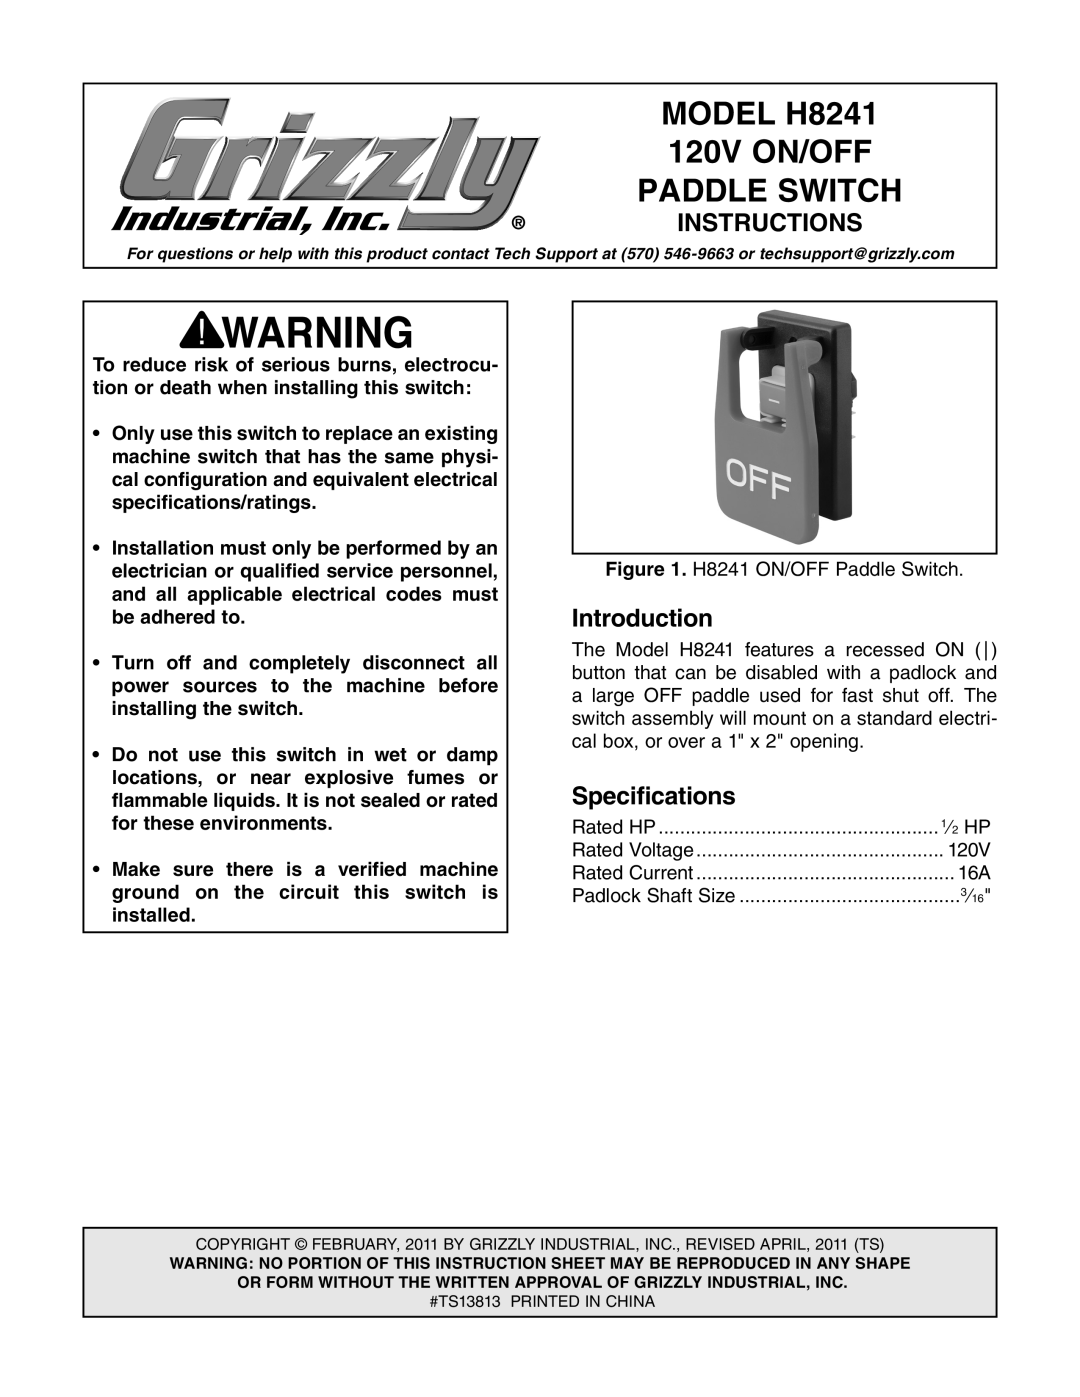 Grizzly specifications Introduction, Specifications, MODEL H8241, 120V ON/OFF, Paddle Switch, Instructions 